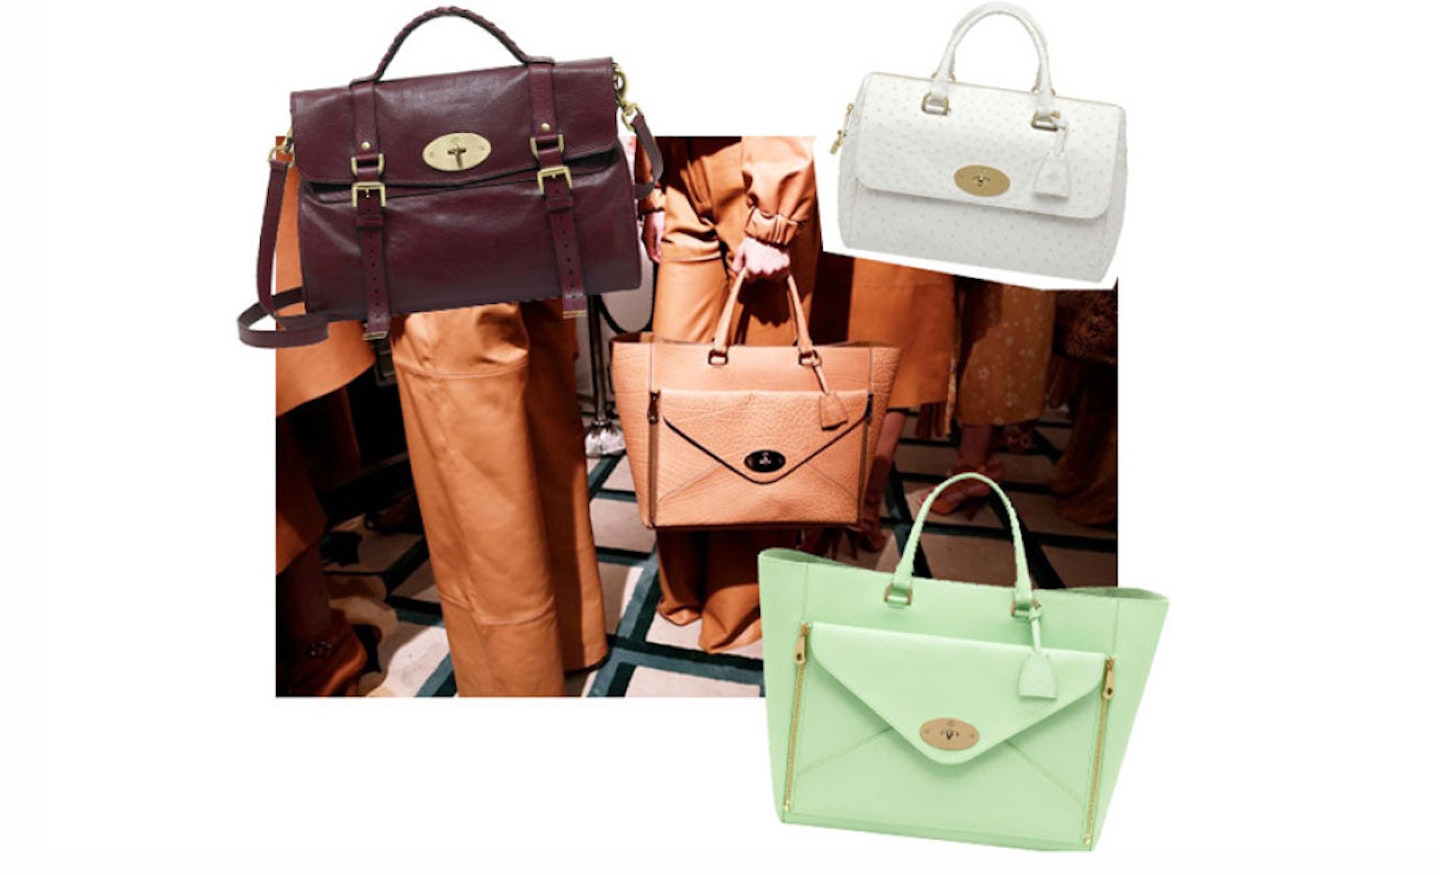 Some of our favourite Mulberry bags